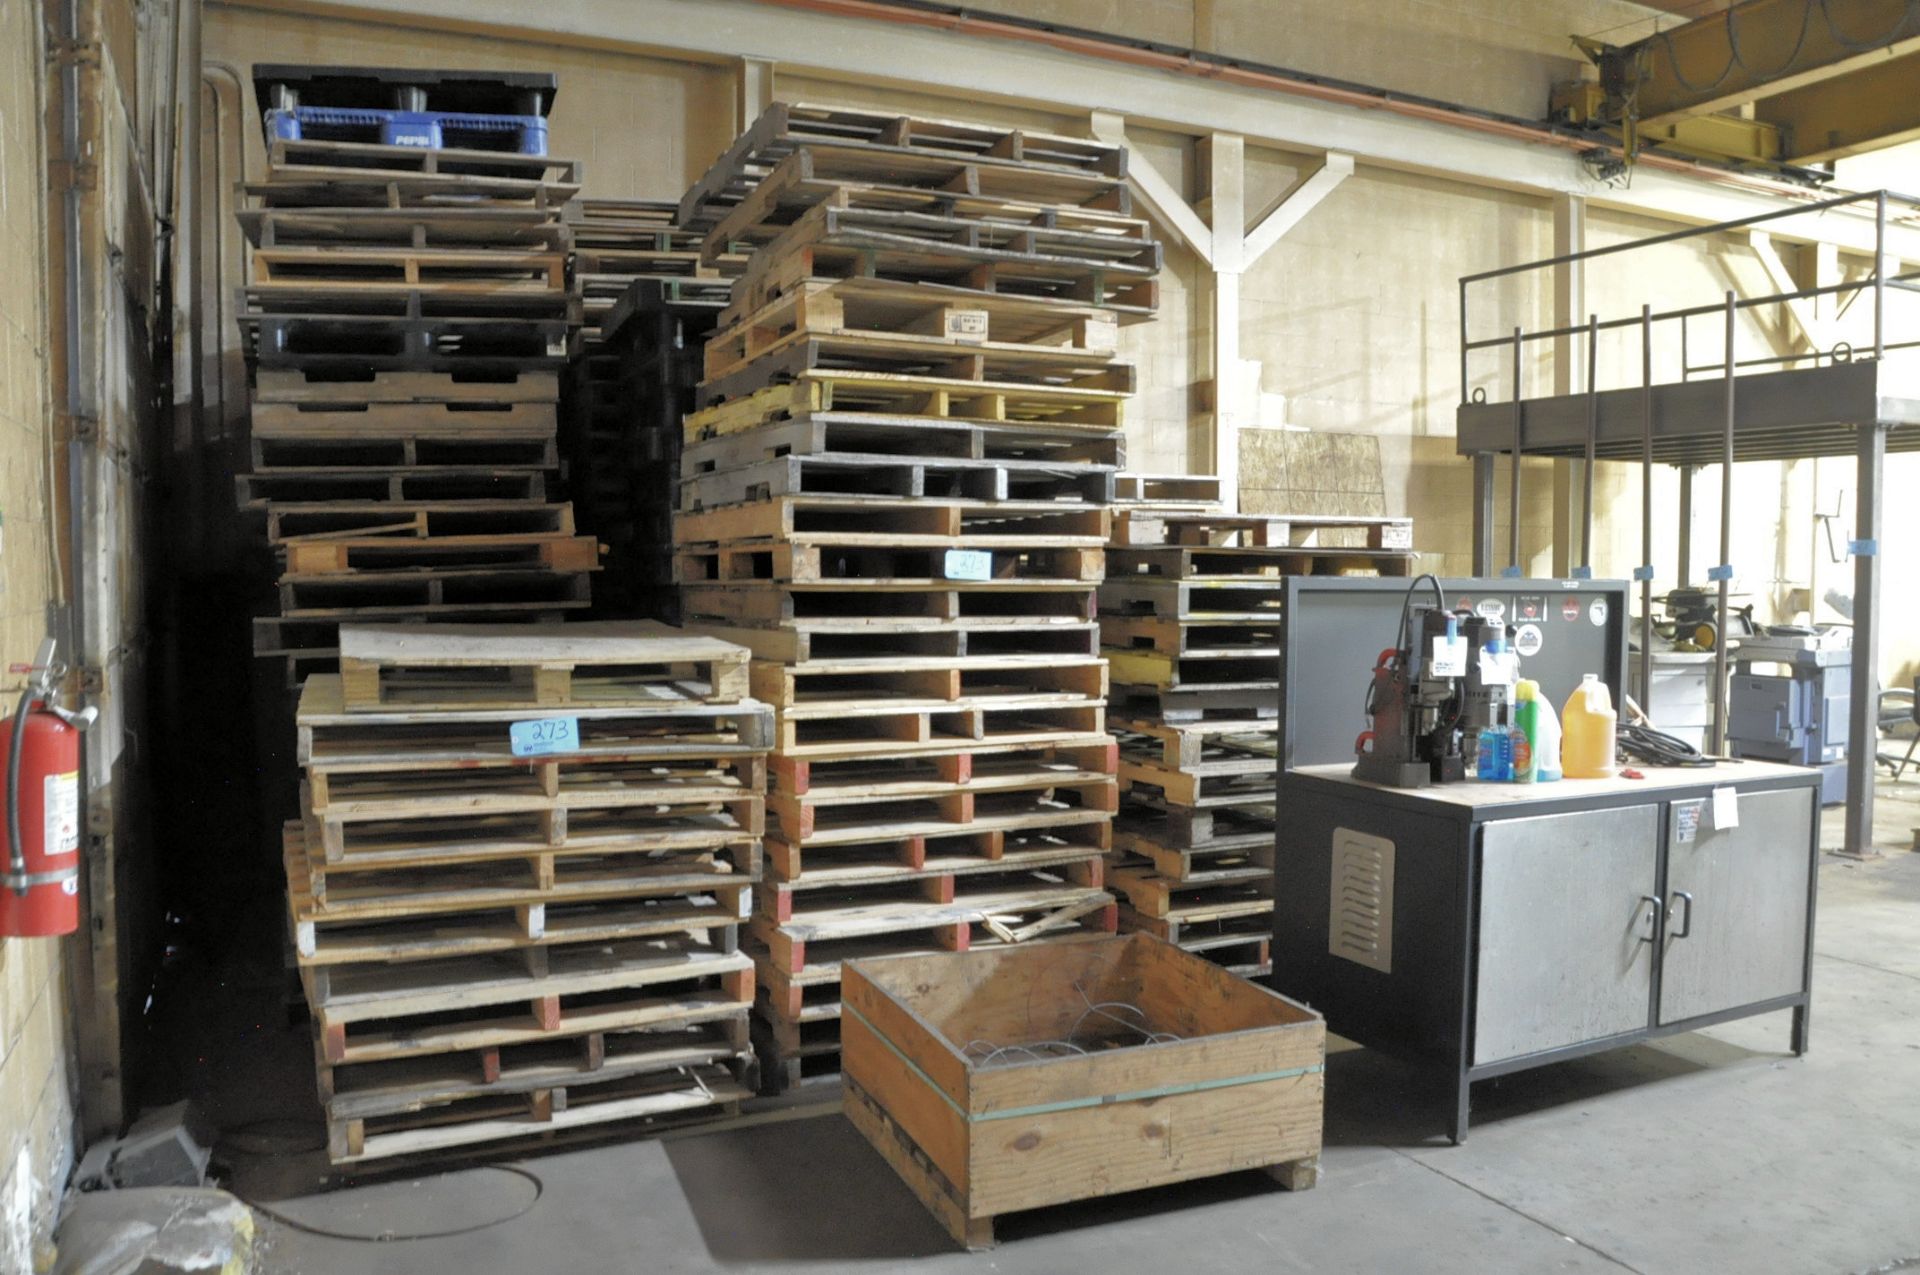 Lot-Approximately 180-200 Wood Pallets in (3) Rows, 40"-44" x 48" Approximate Dimensions - Image 5 of 5